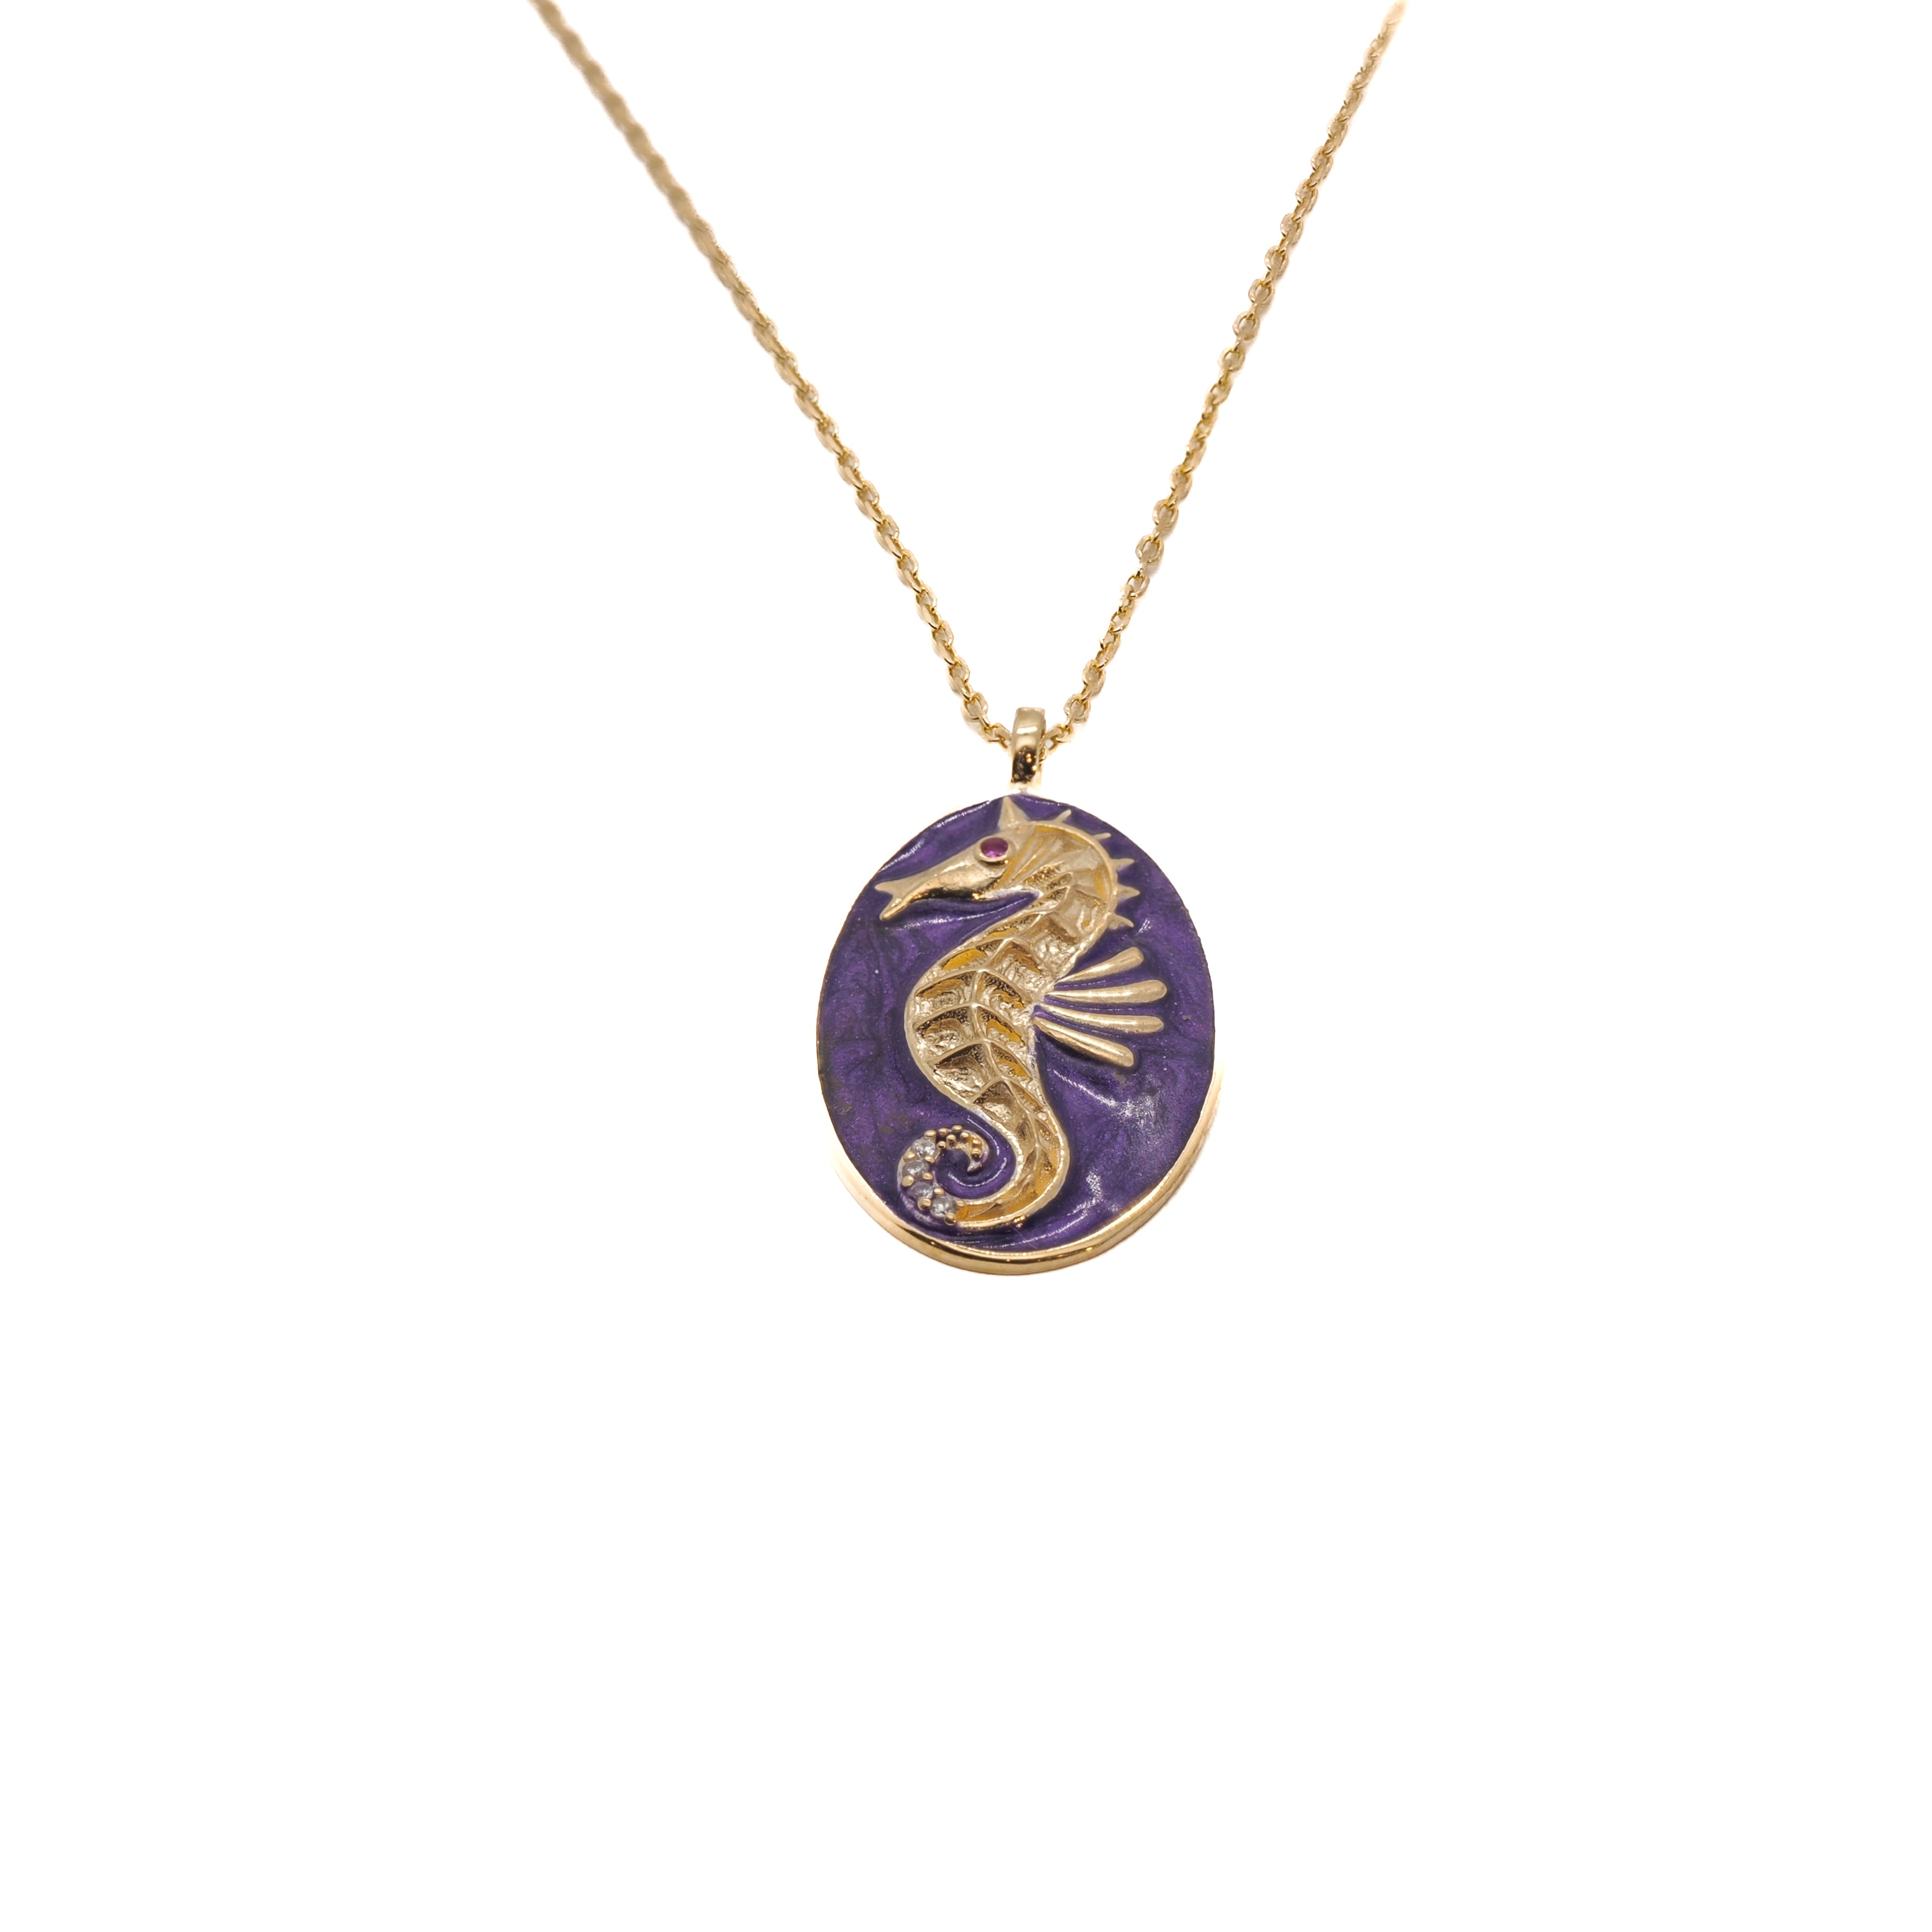 The Spirit Animal Seahorse Necklace, a captivating piece featuring an intricately detailed seahorse pendant in vibrant purple enamel.